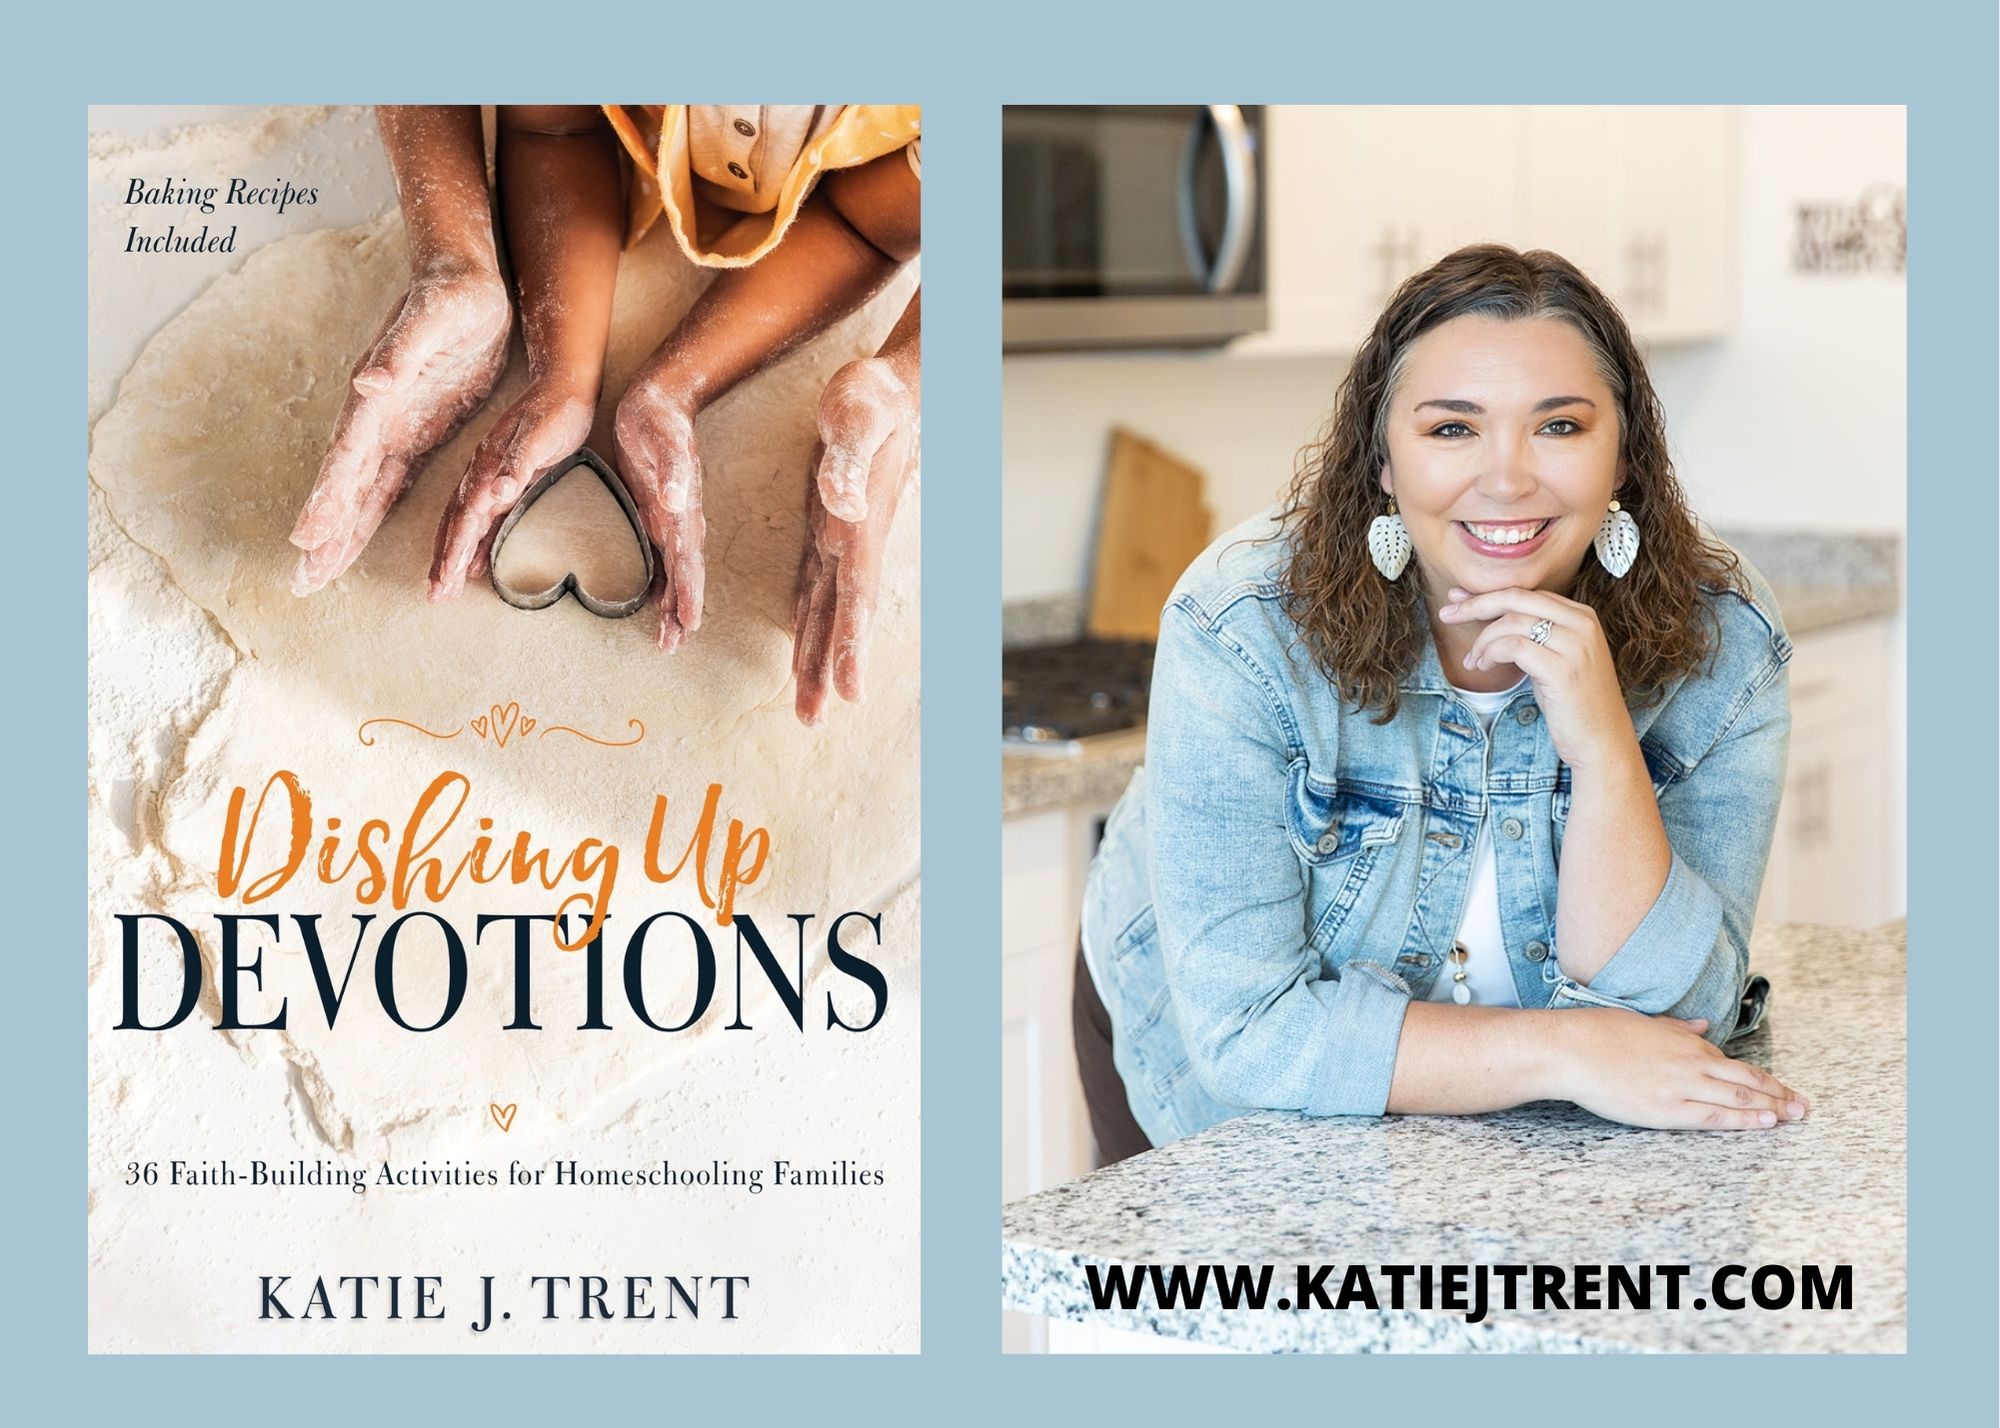 Dishing Up Devotions with Katie J. Trent